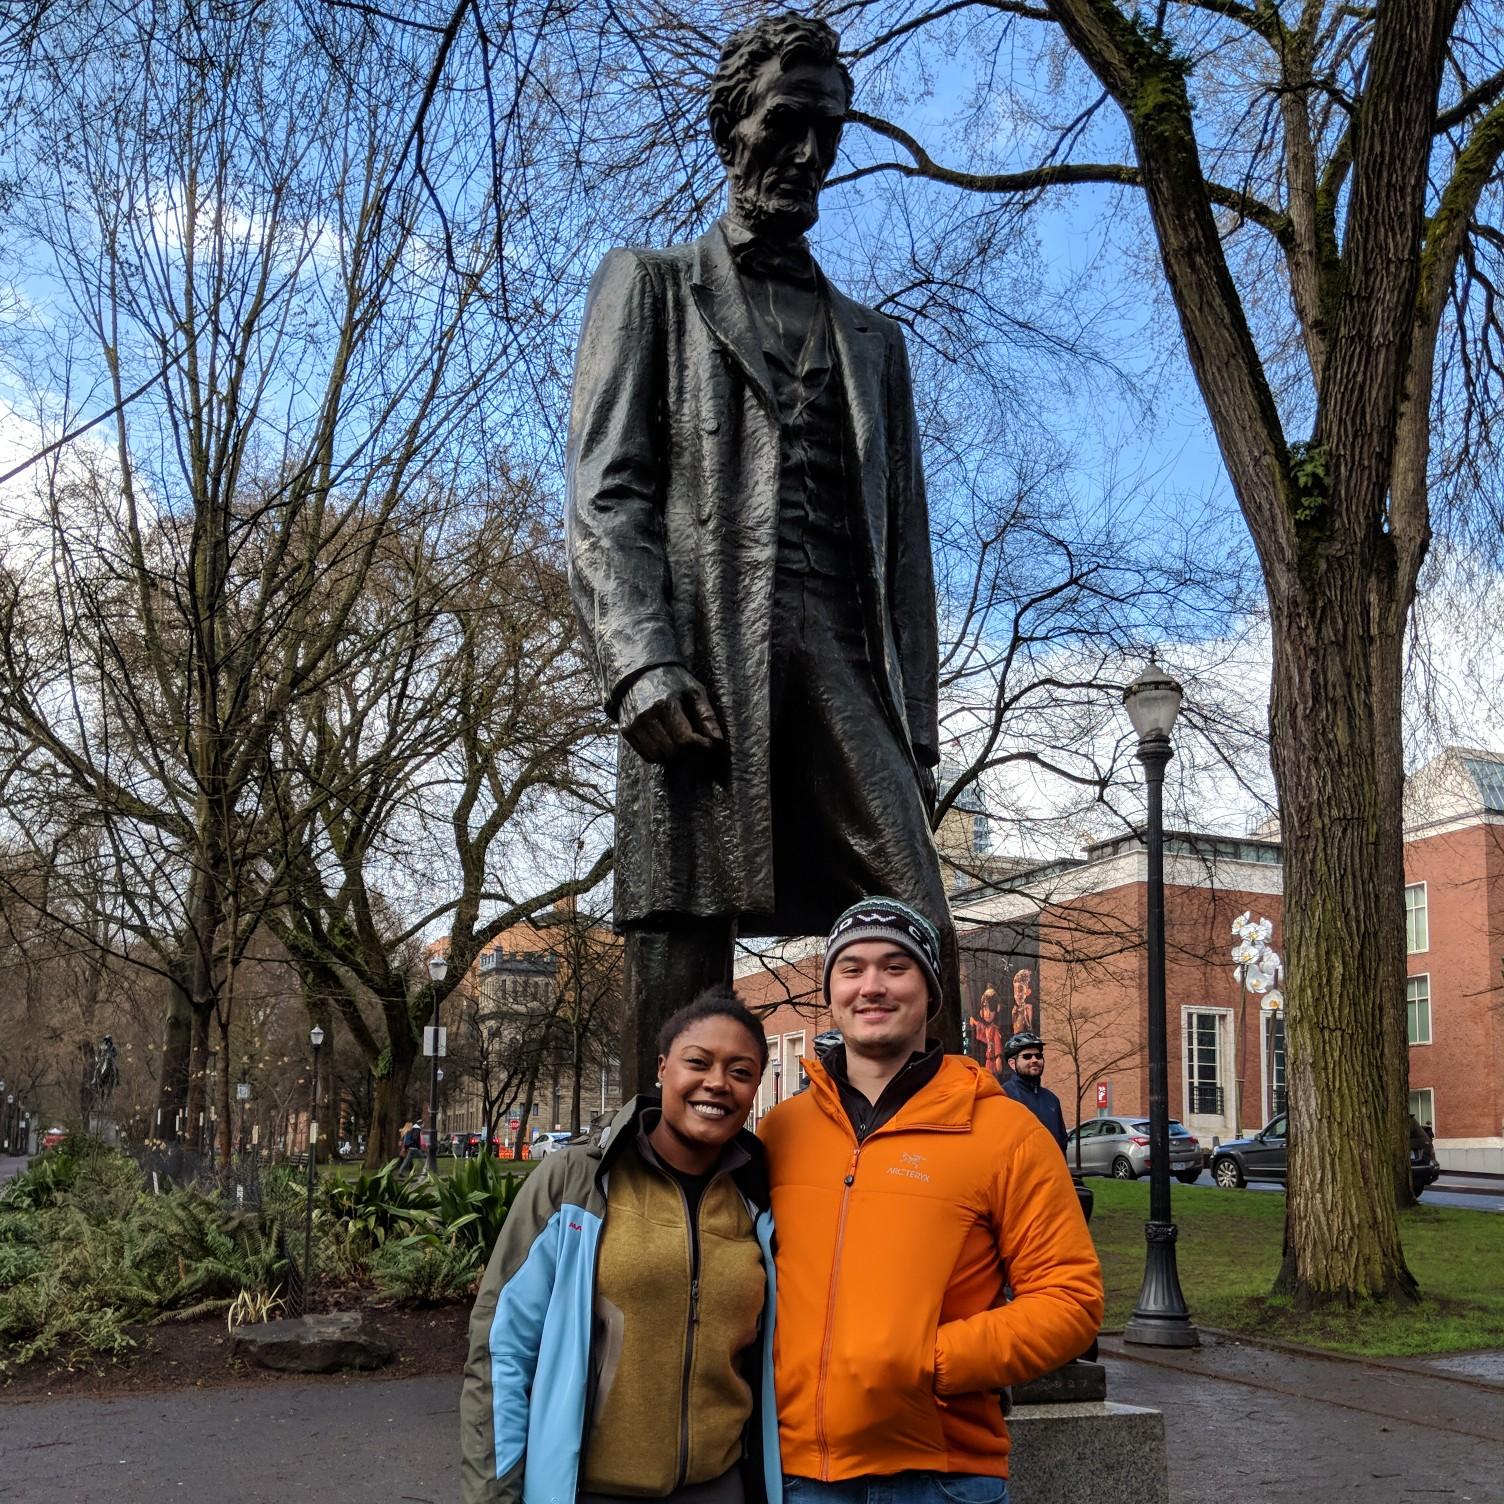 Hanging out with ole Abe in Portland!  18'